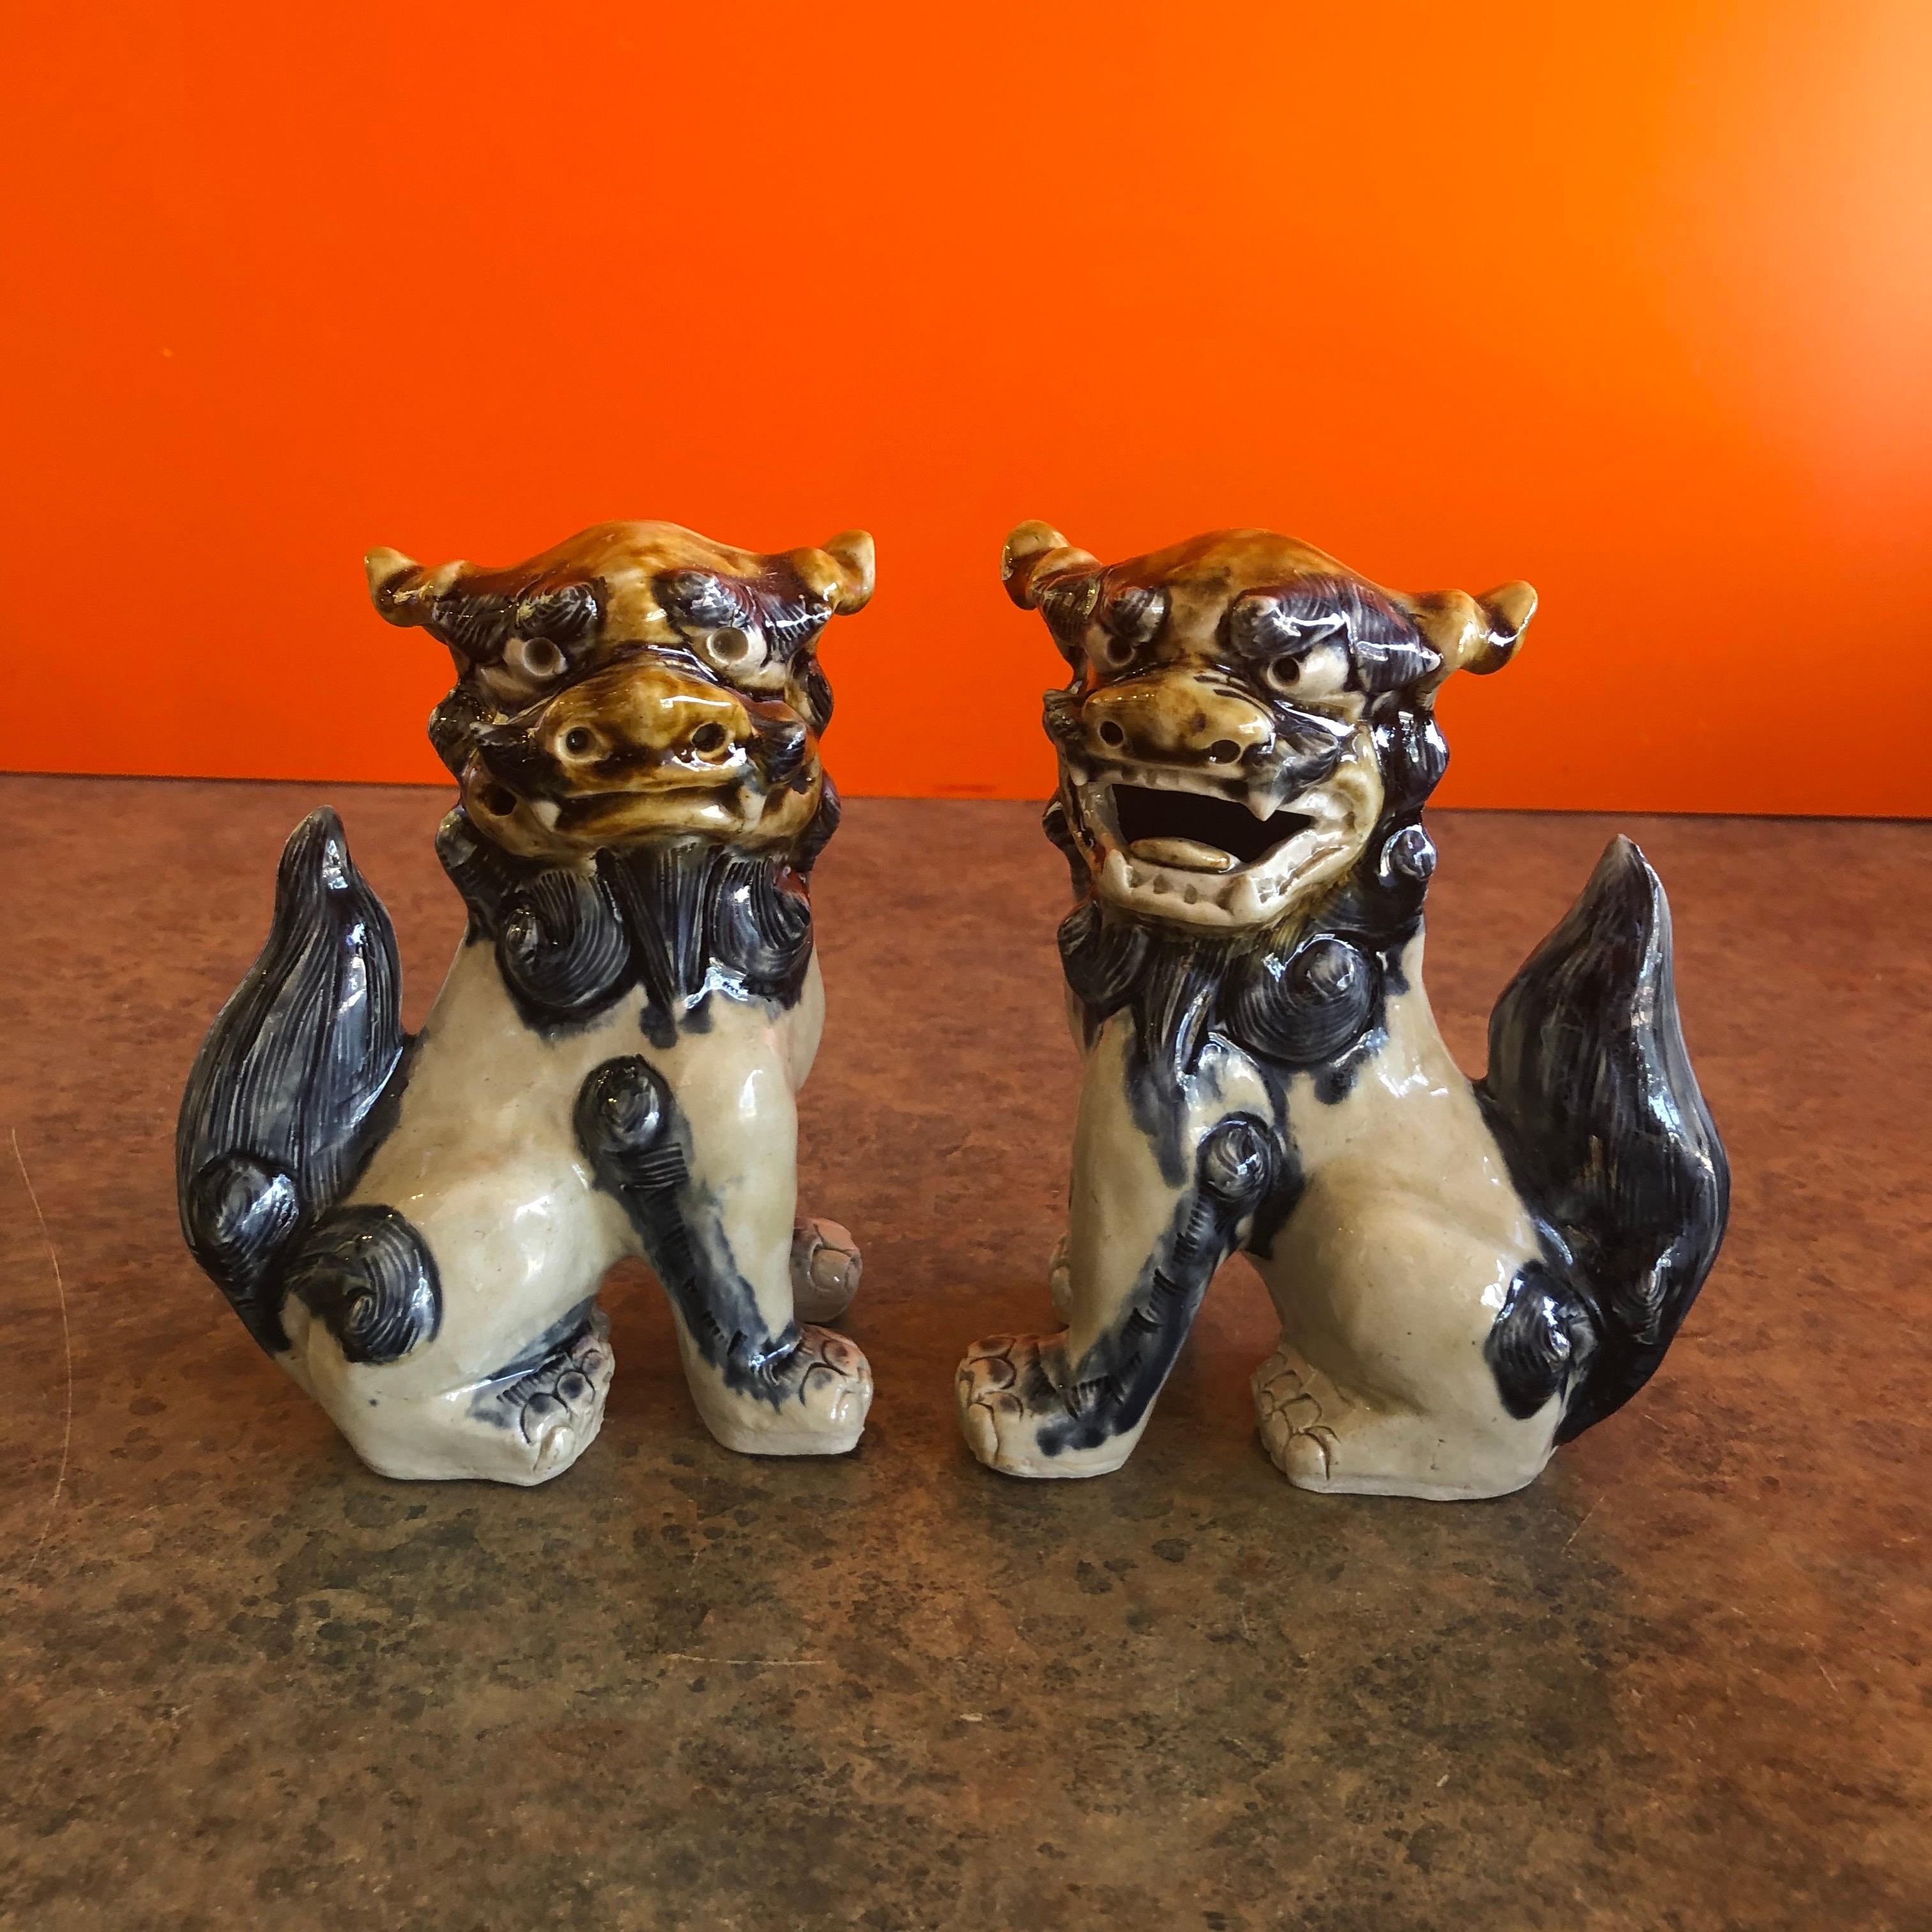 A very nice pair of vintage tan, cream and blue foo dogs, circa 1970s. Excellent condition and patina; the pair is made of pottery and would make great bookends or a fun decor item in any room! #1162.